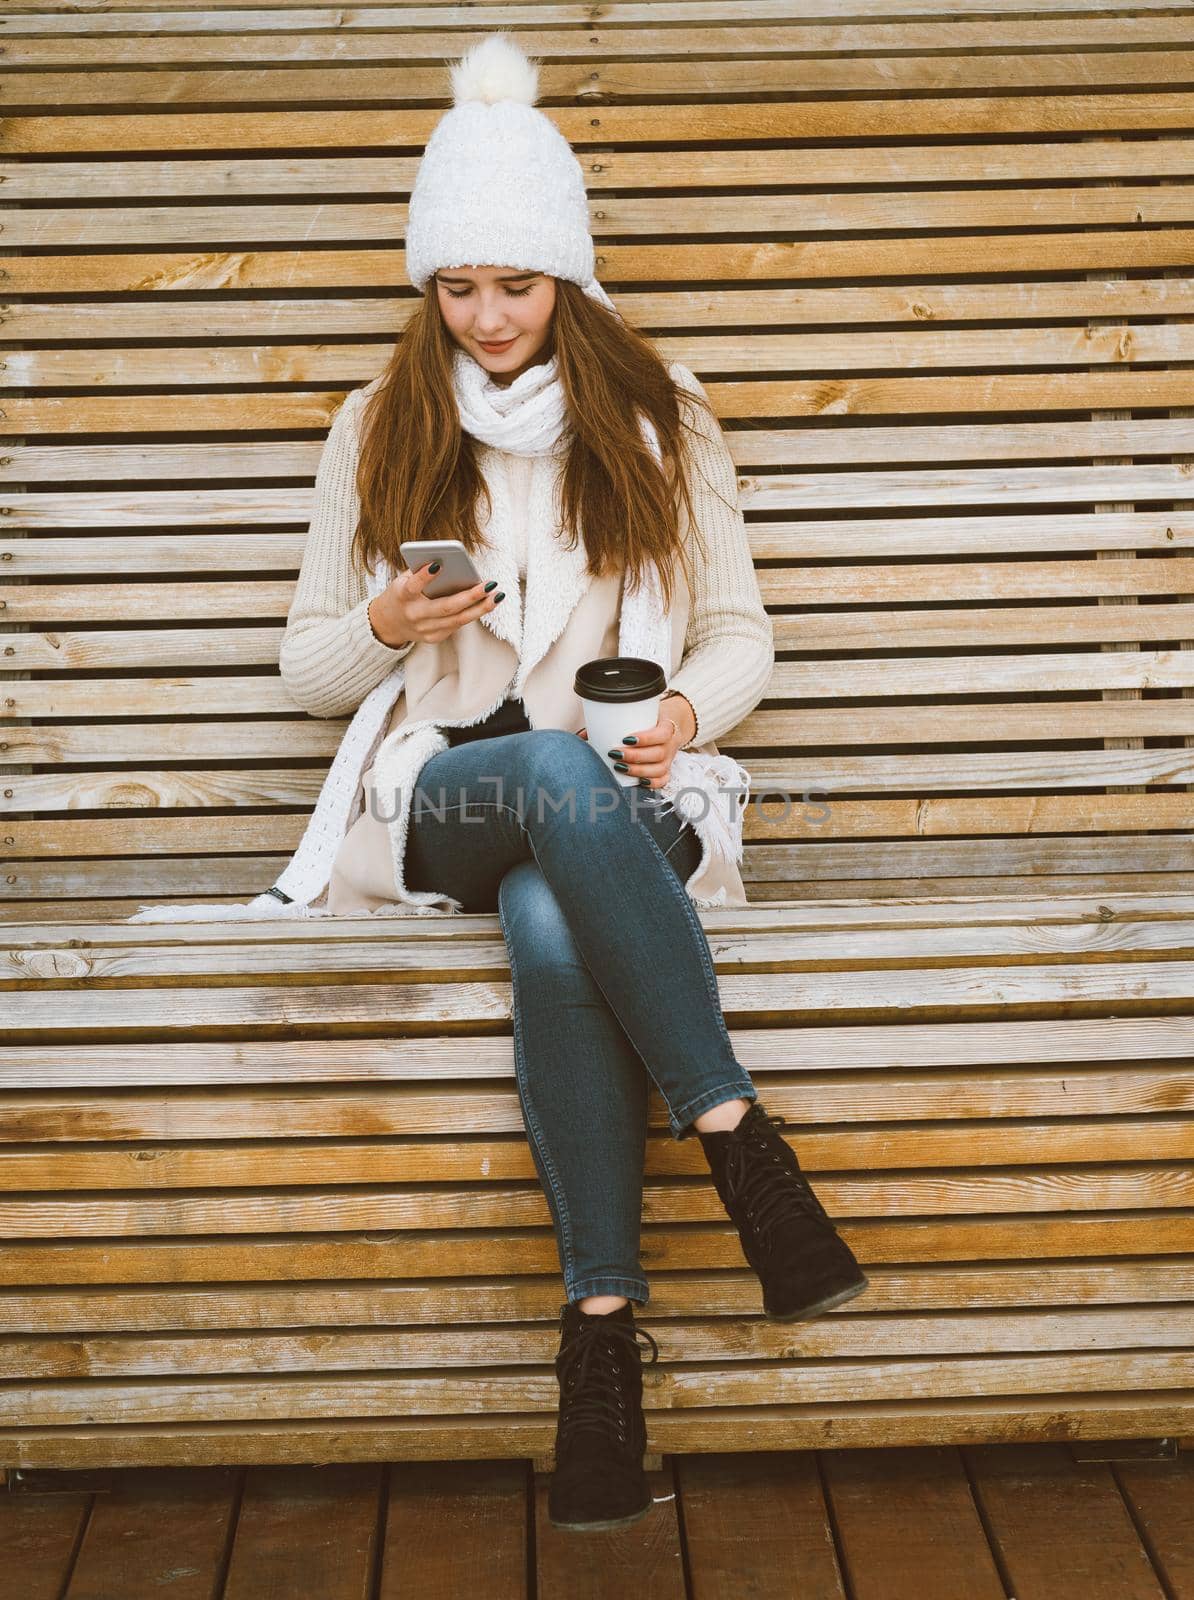 Beautiful young girl drinking coffee, tea from a plastic mug in autumn, winter and talking on a mobile phone. Woman with long hair sitting on a bench in autumn or winter, basking in a hot drink, copy space, vertical